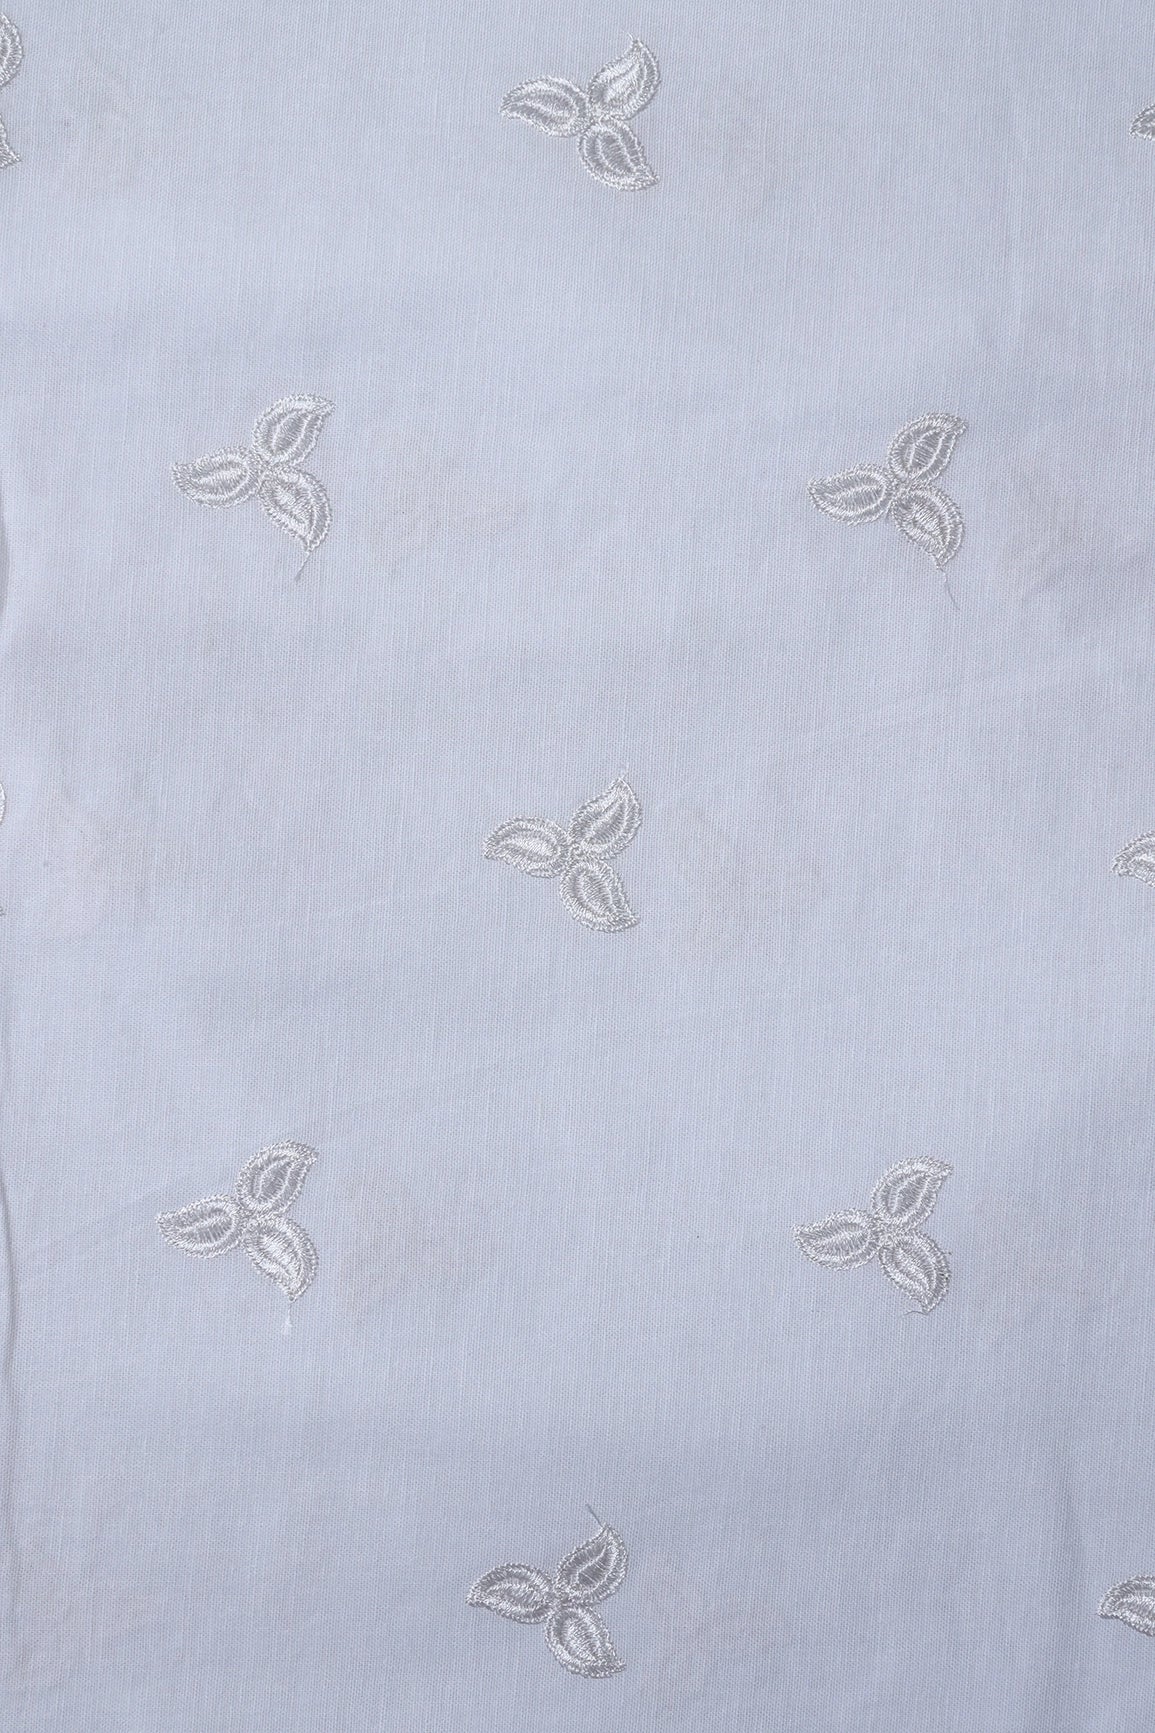 White Thread Small Floral Embroidery Work On White Organic Cotton Fabric - doeraa